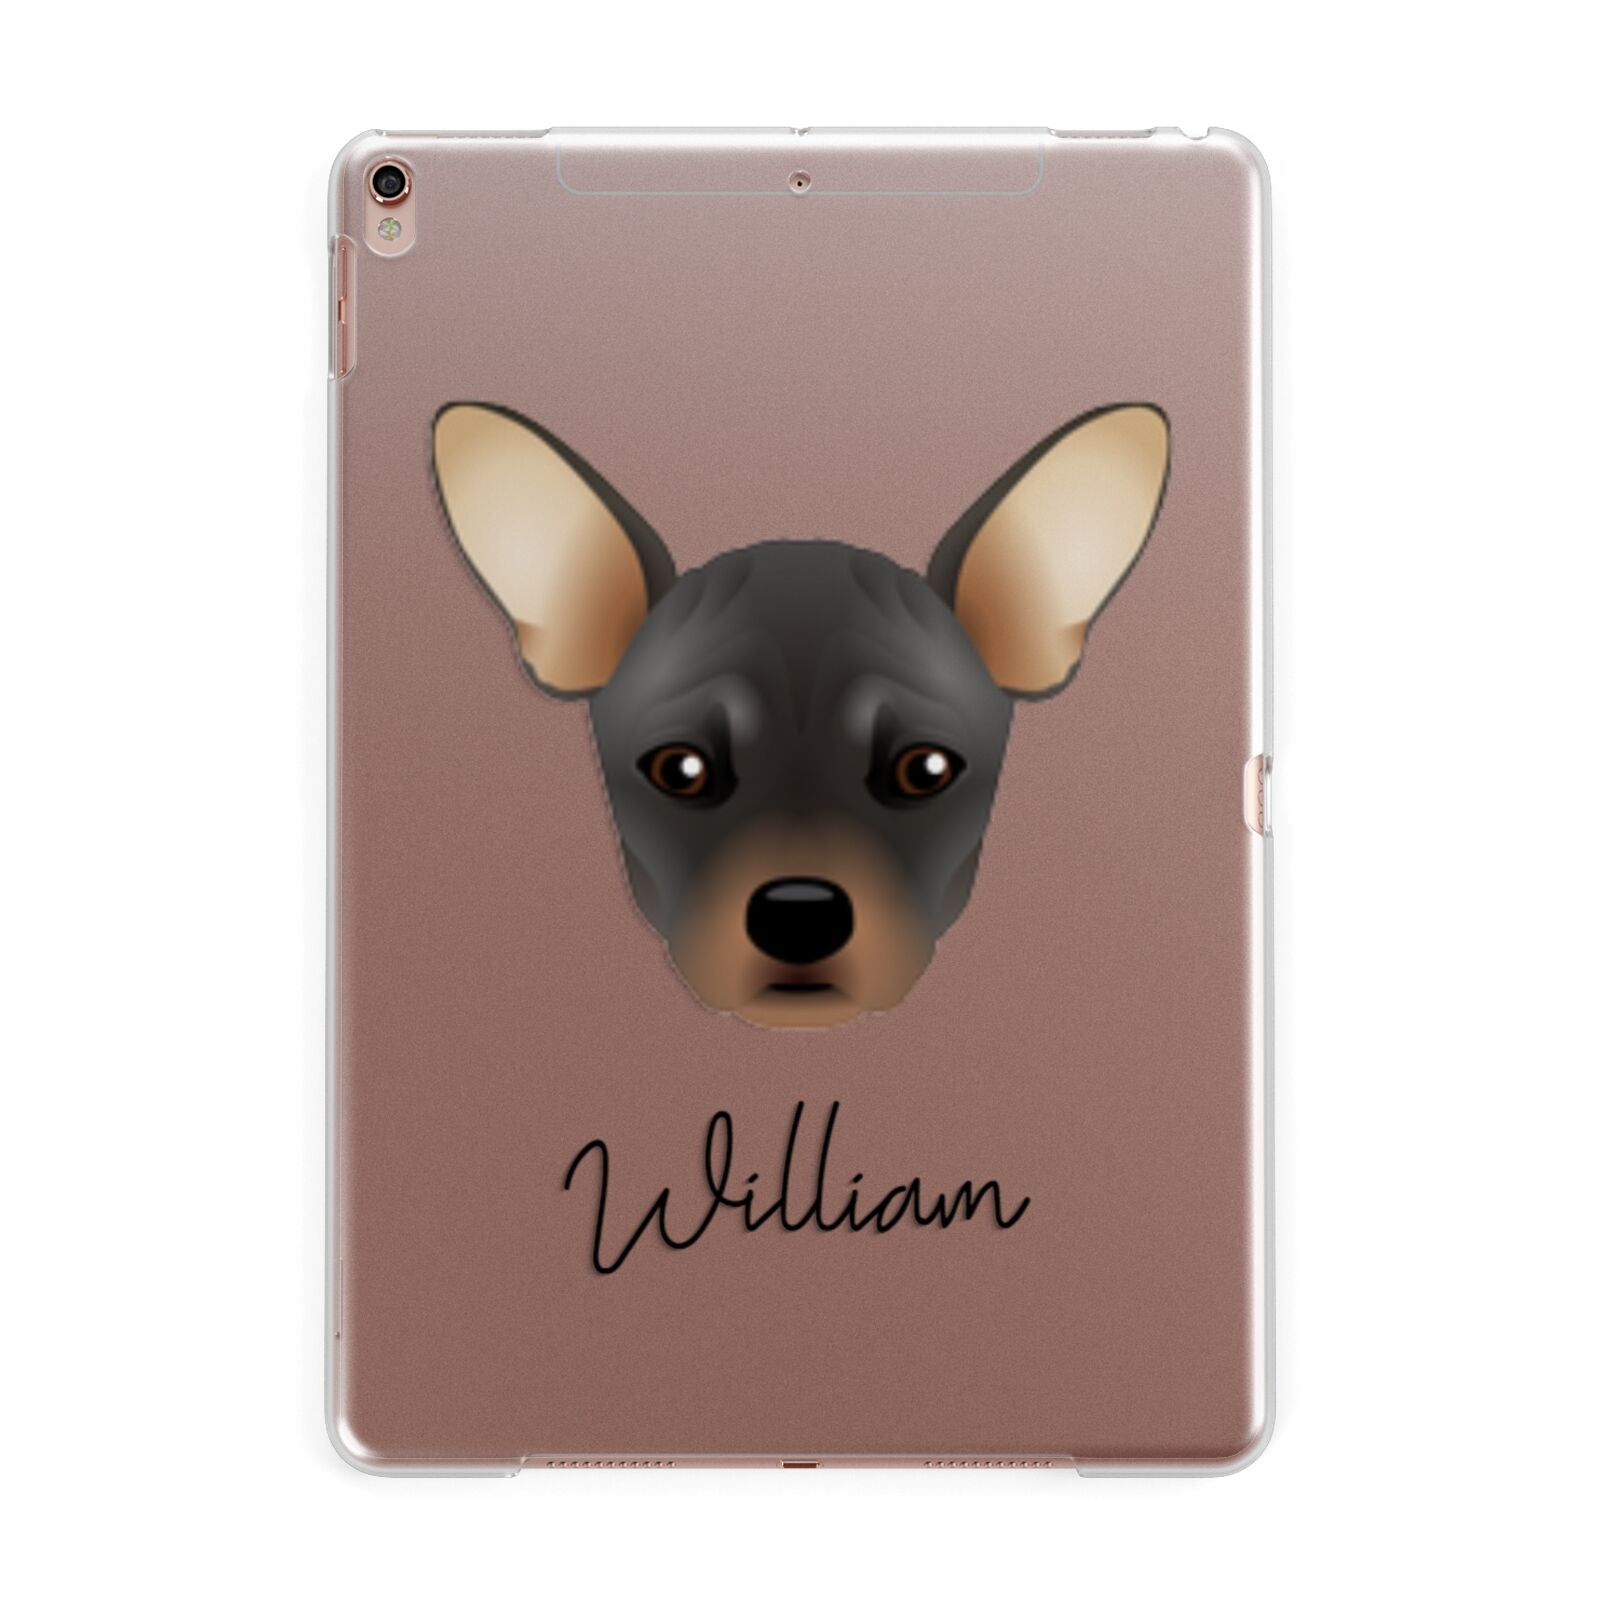 French Pin Personalised Apple iPad Rose Gold Case